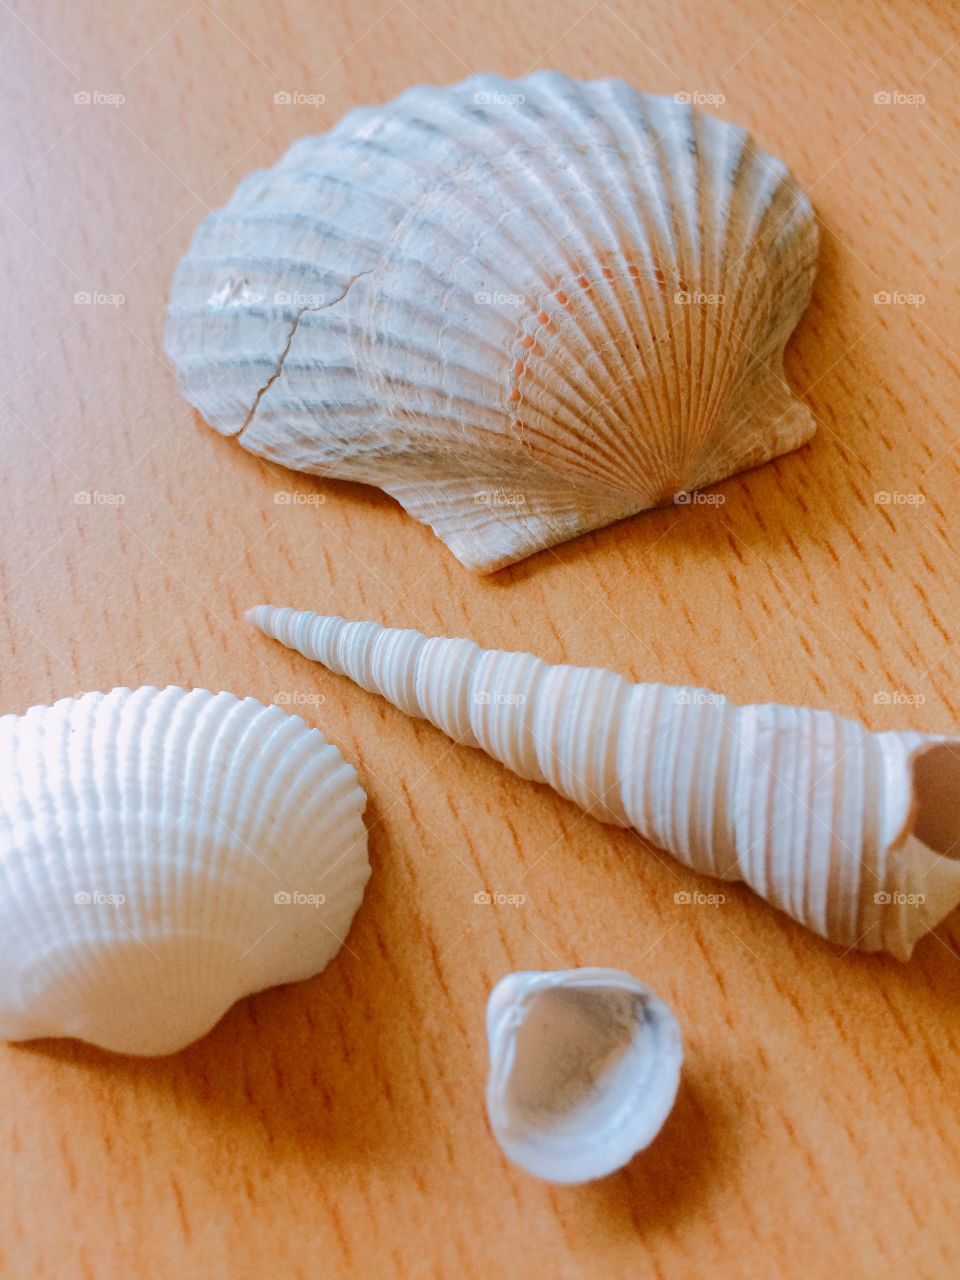 Upclose with shells 